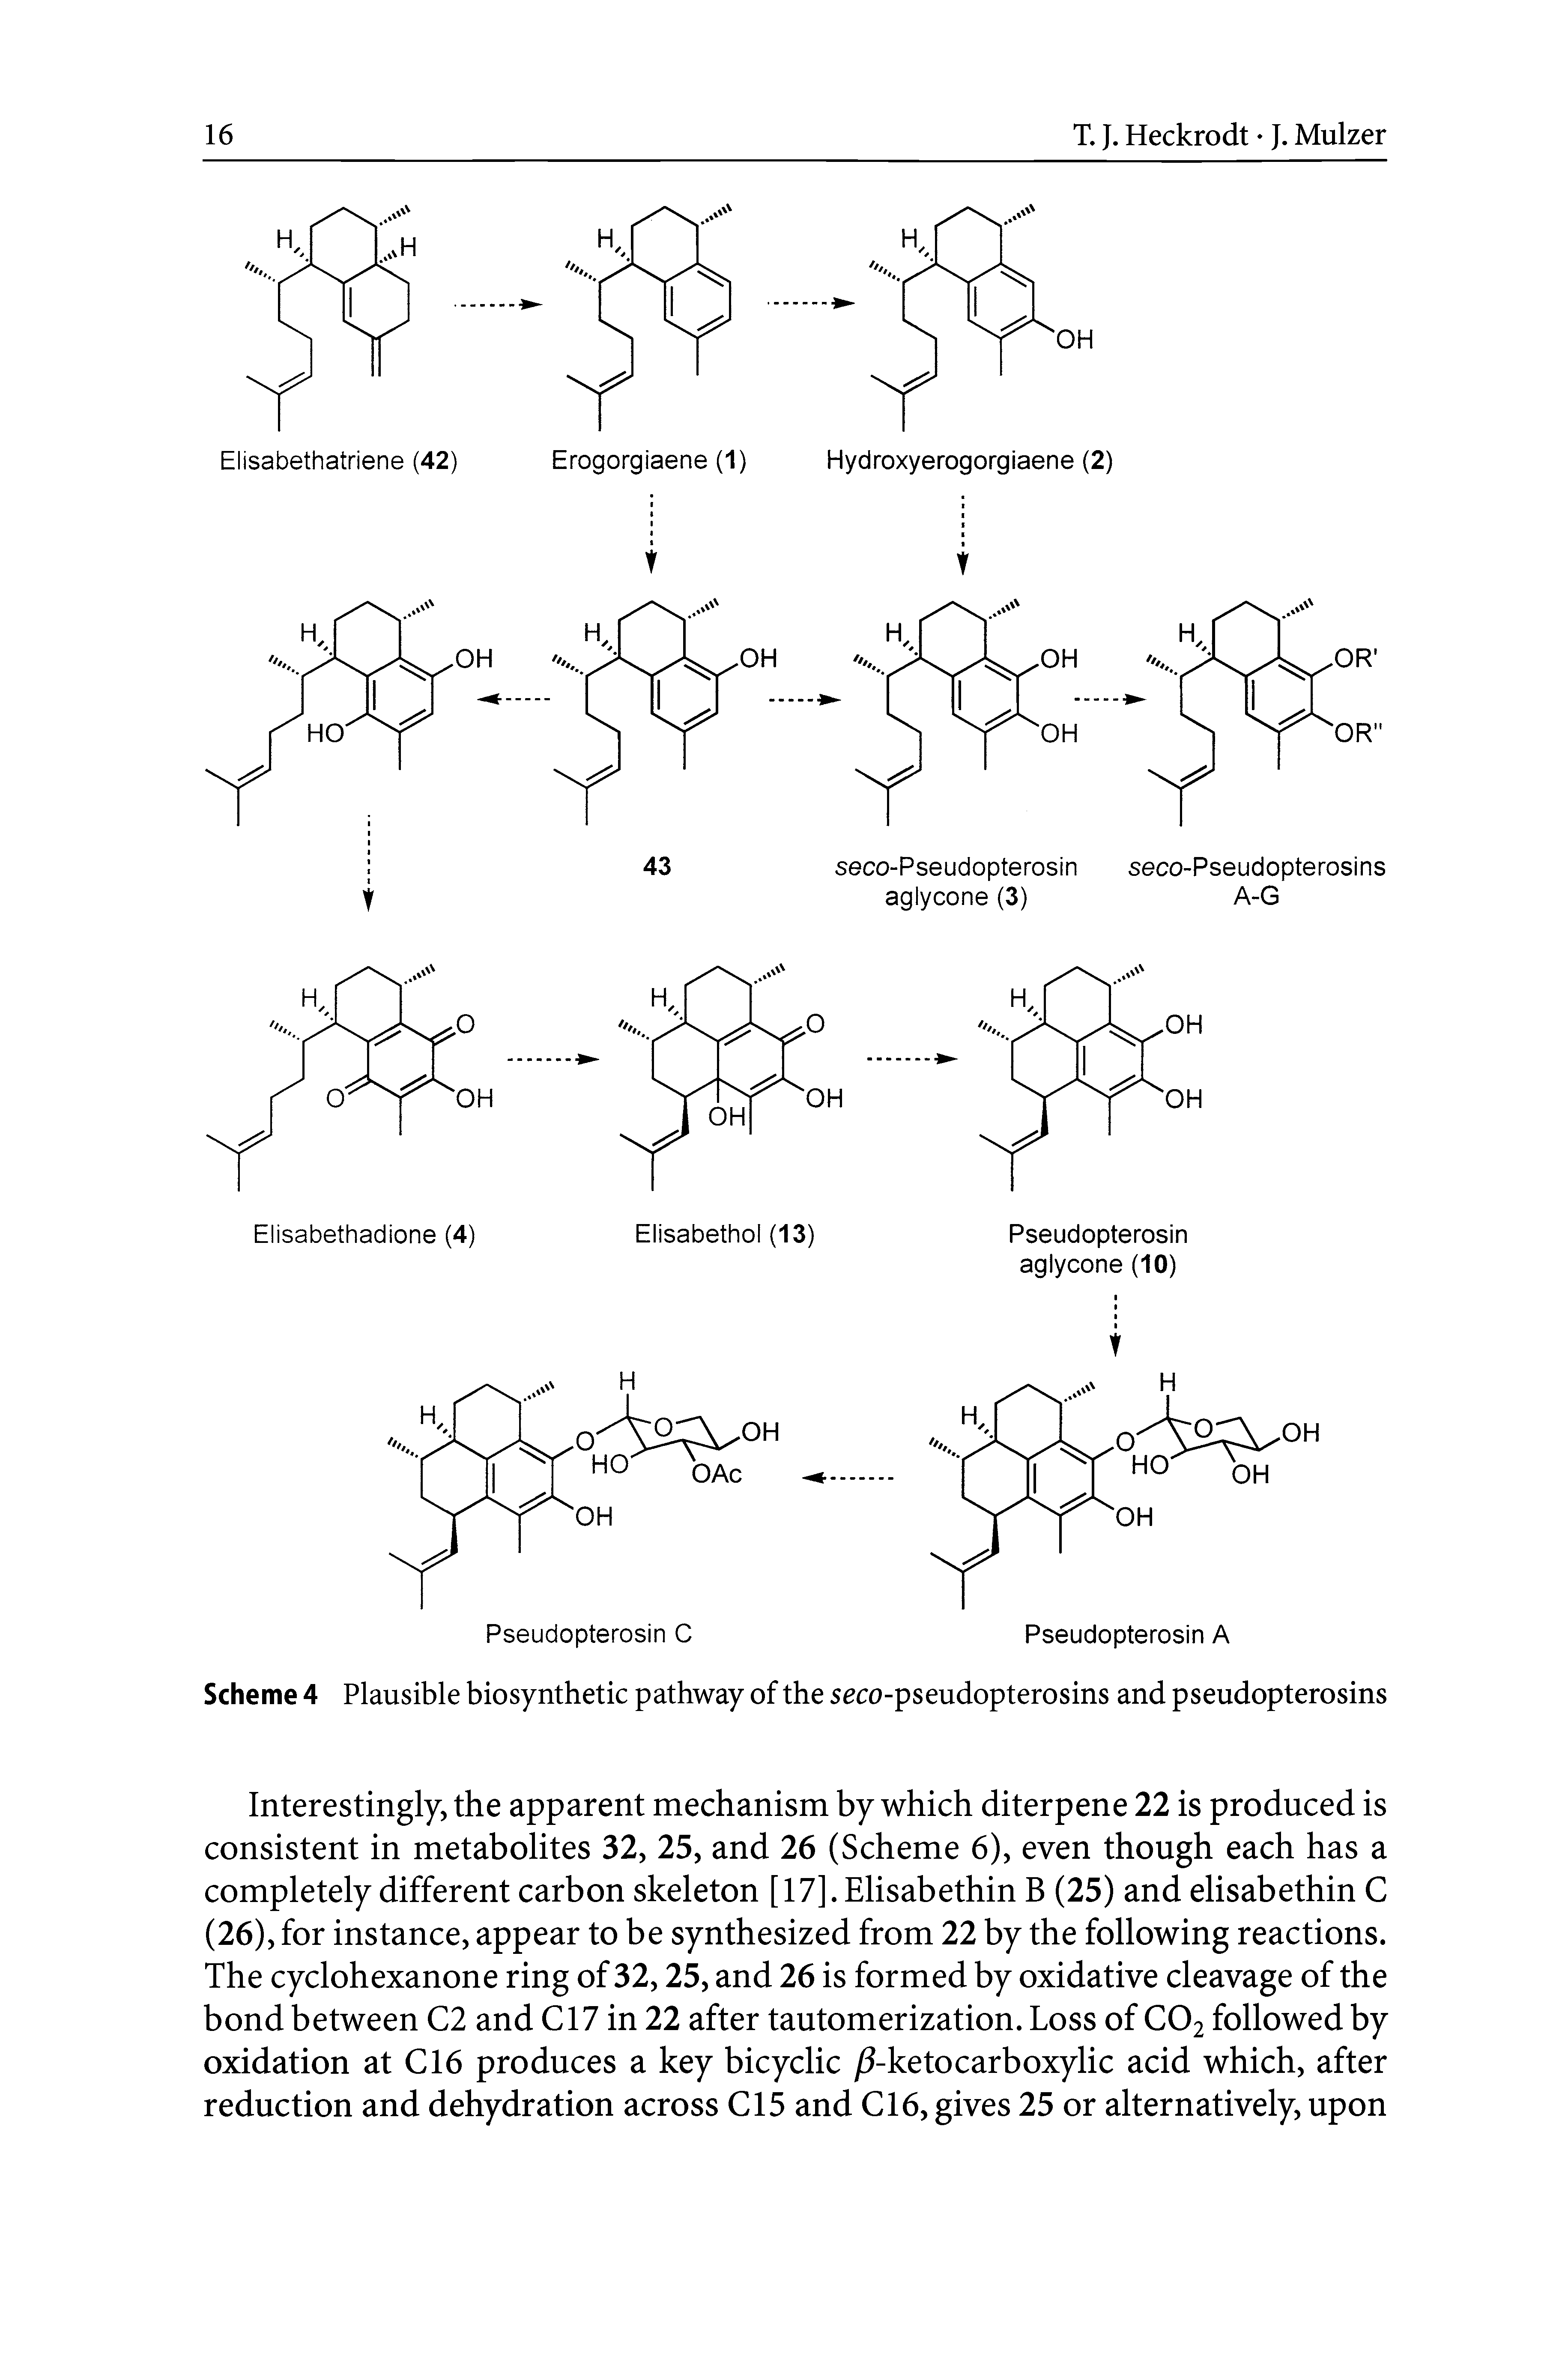 Scheme 4 Plausible biosynthetic pathway of the seco-pseudopterosins and pseudopterosins...